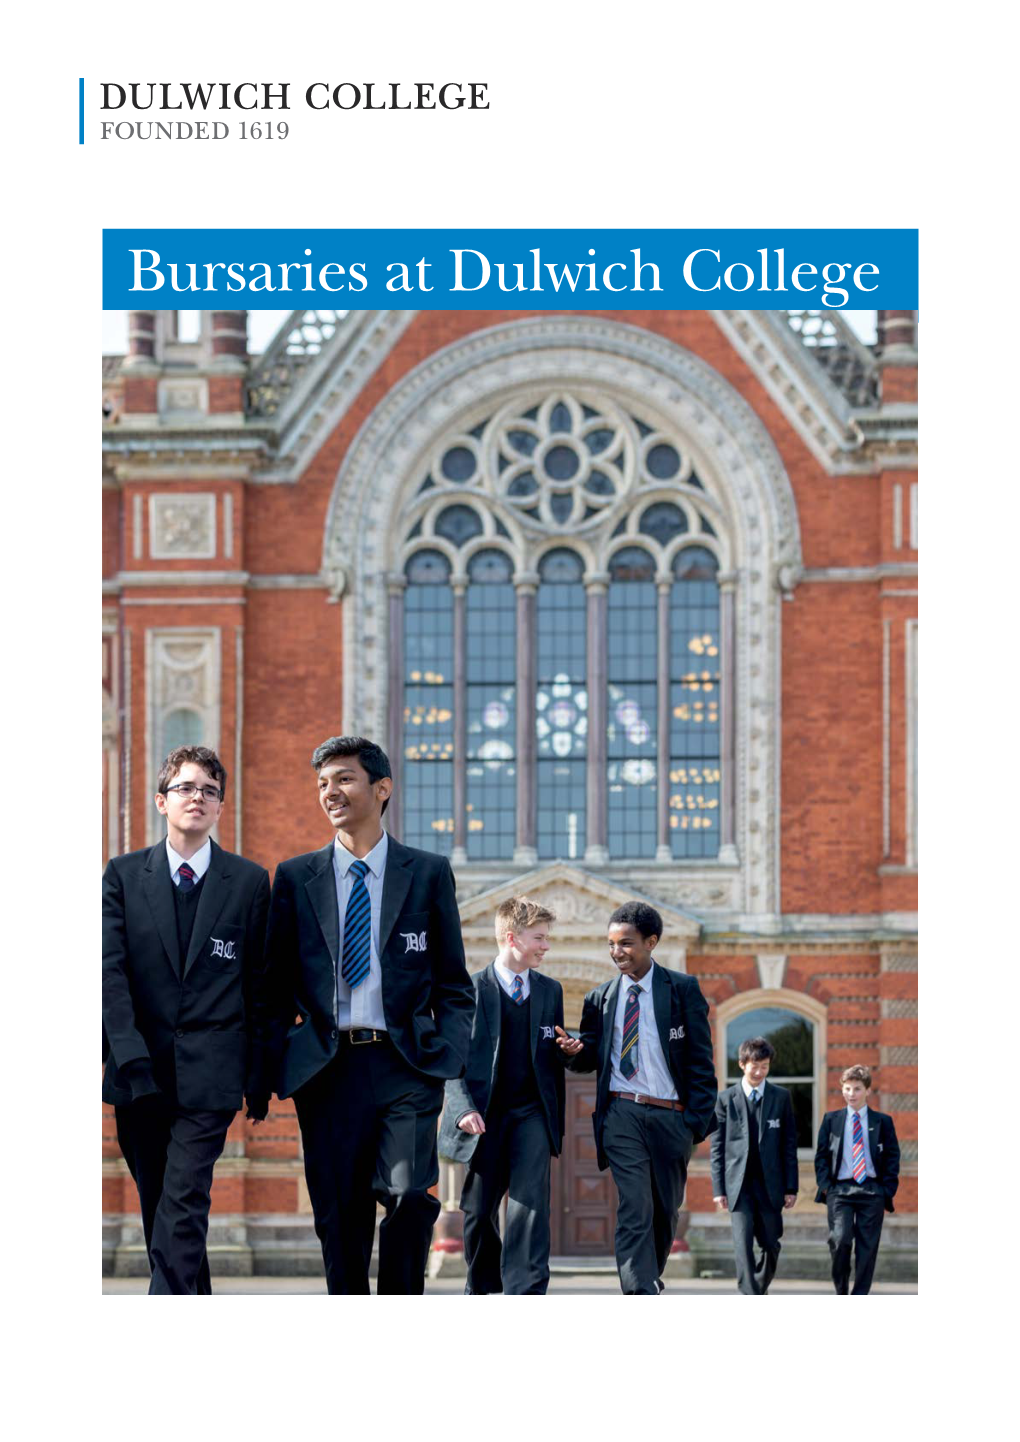 Bursaries at Dulwich College the ‘New Dulwich Experiment’: Bursaries at Dulwich College